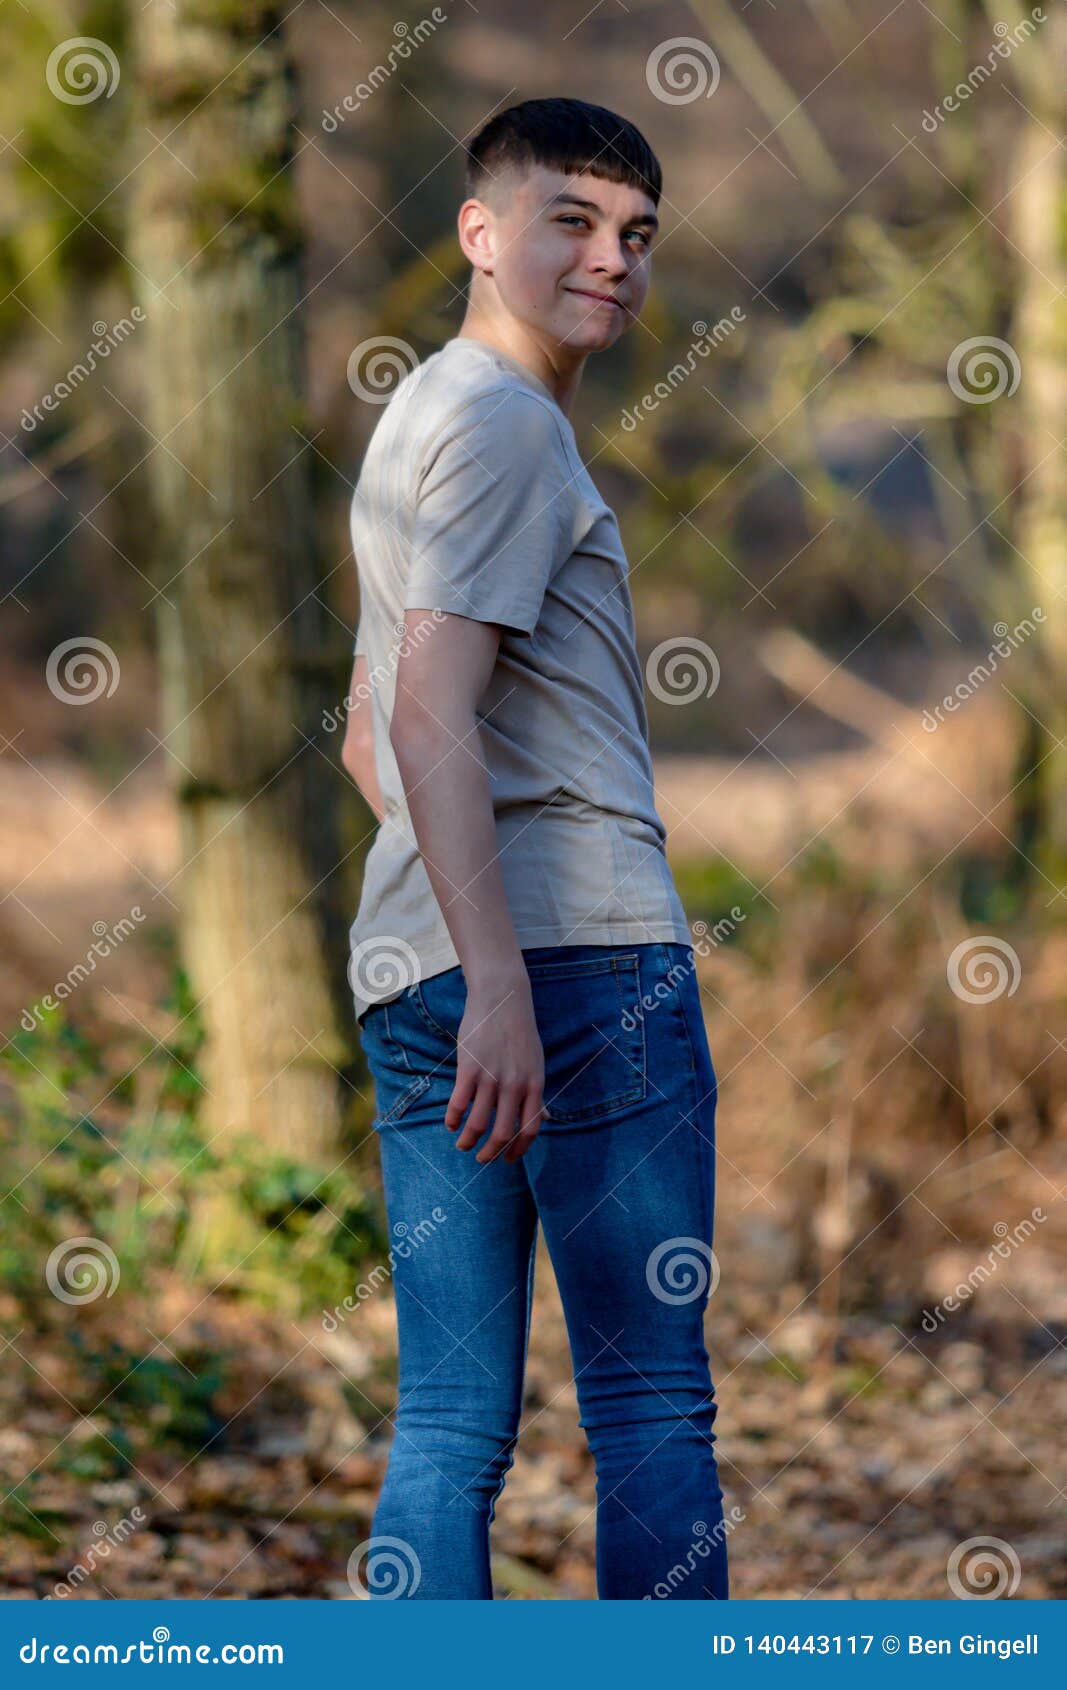 Teenage Boy Outside on a Bright Spring Day Stock Image - Image of teen ...